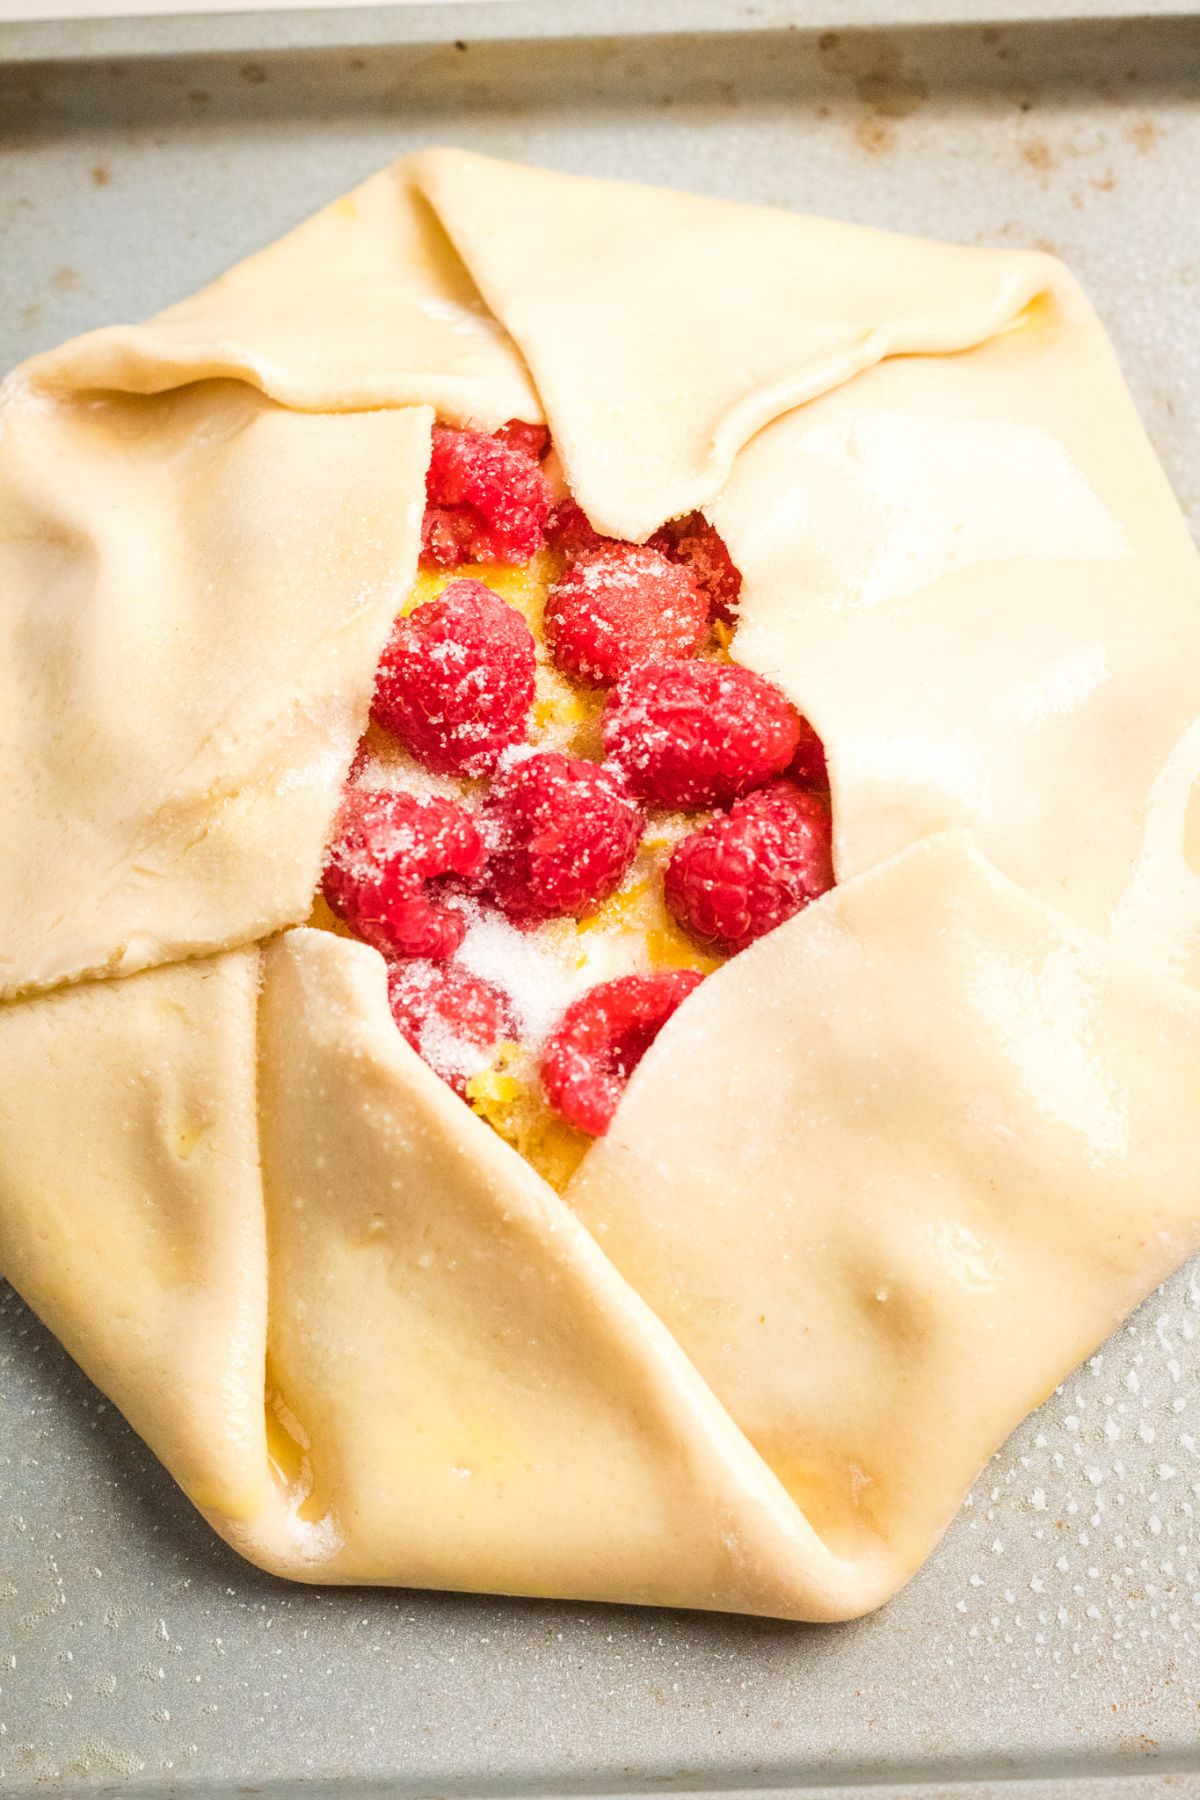 Fold the crust into the raspberry and cream cheese inside. 